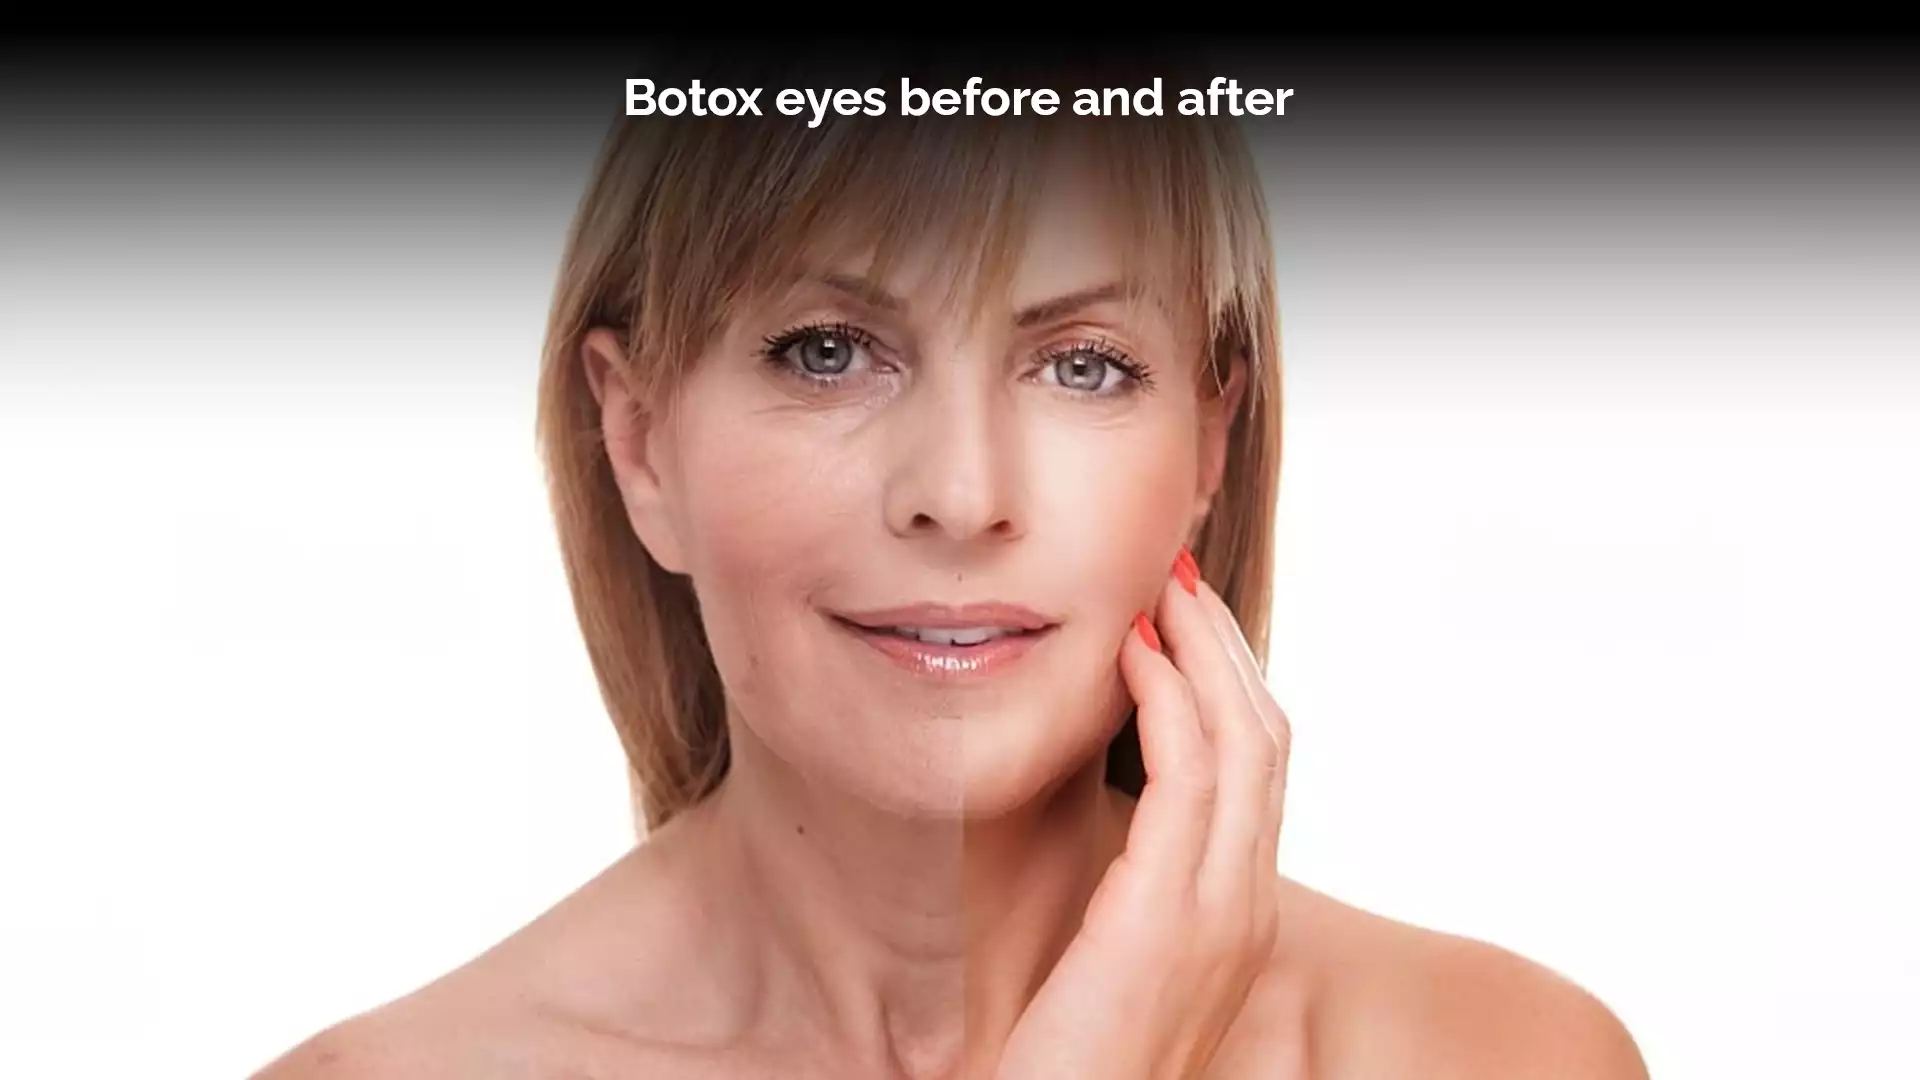 Botox eyes before and after